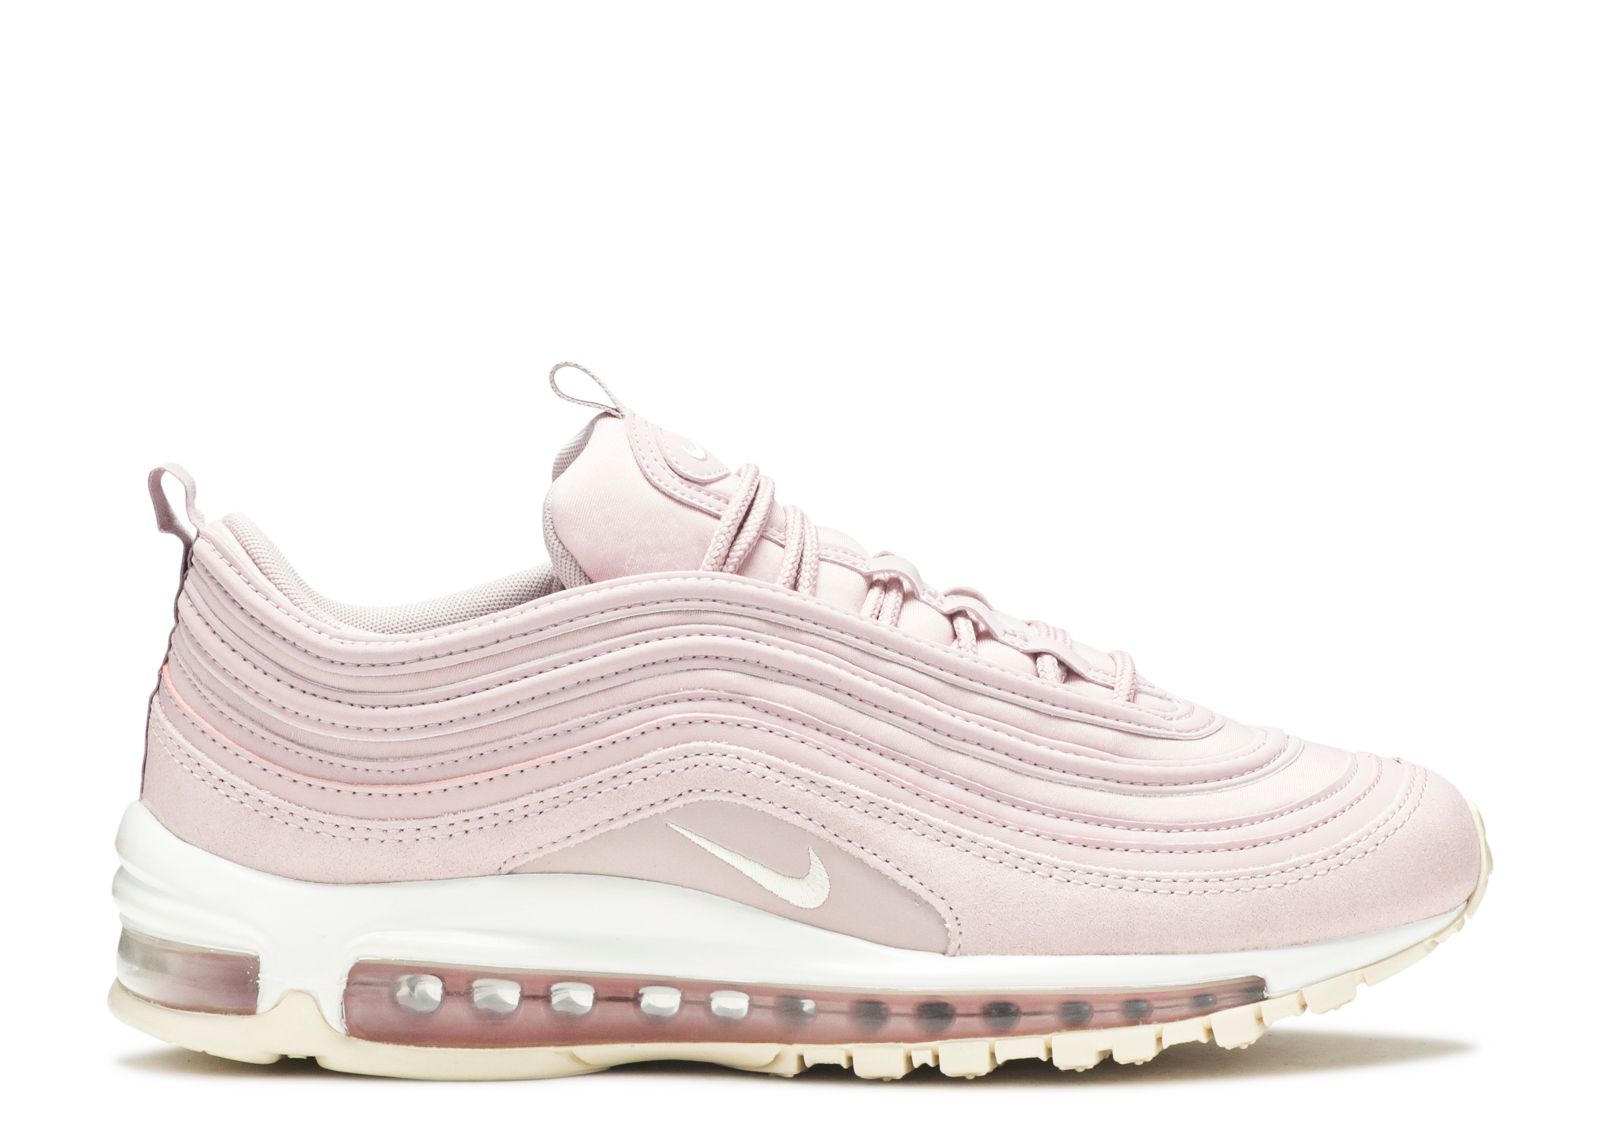 Undefeated Nike Air Max 97 Sail White Gorge Green Speed